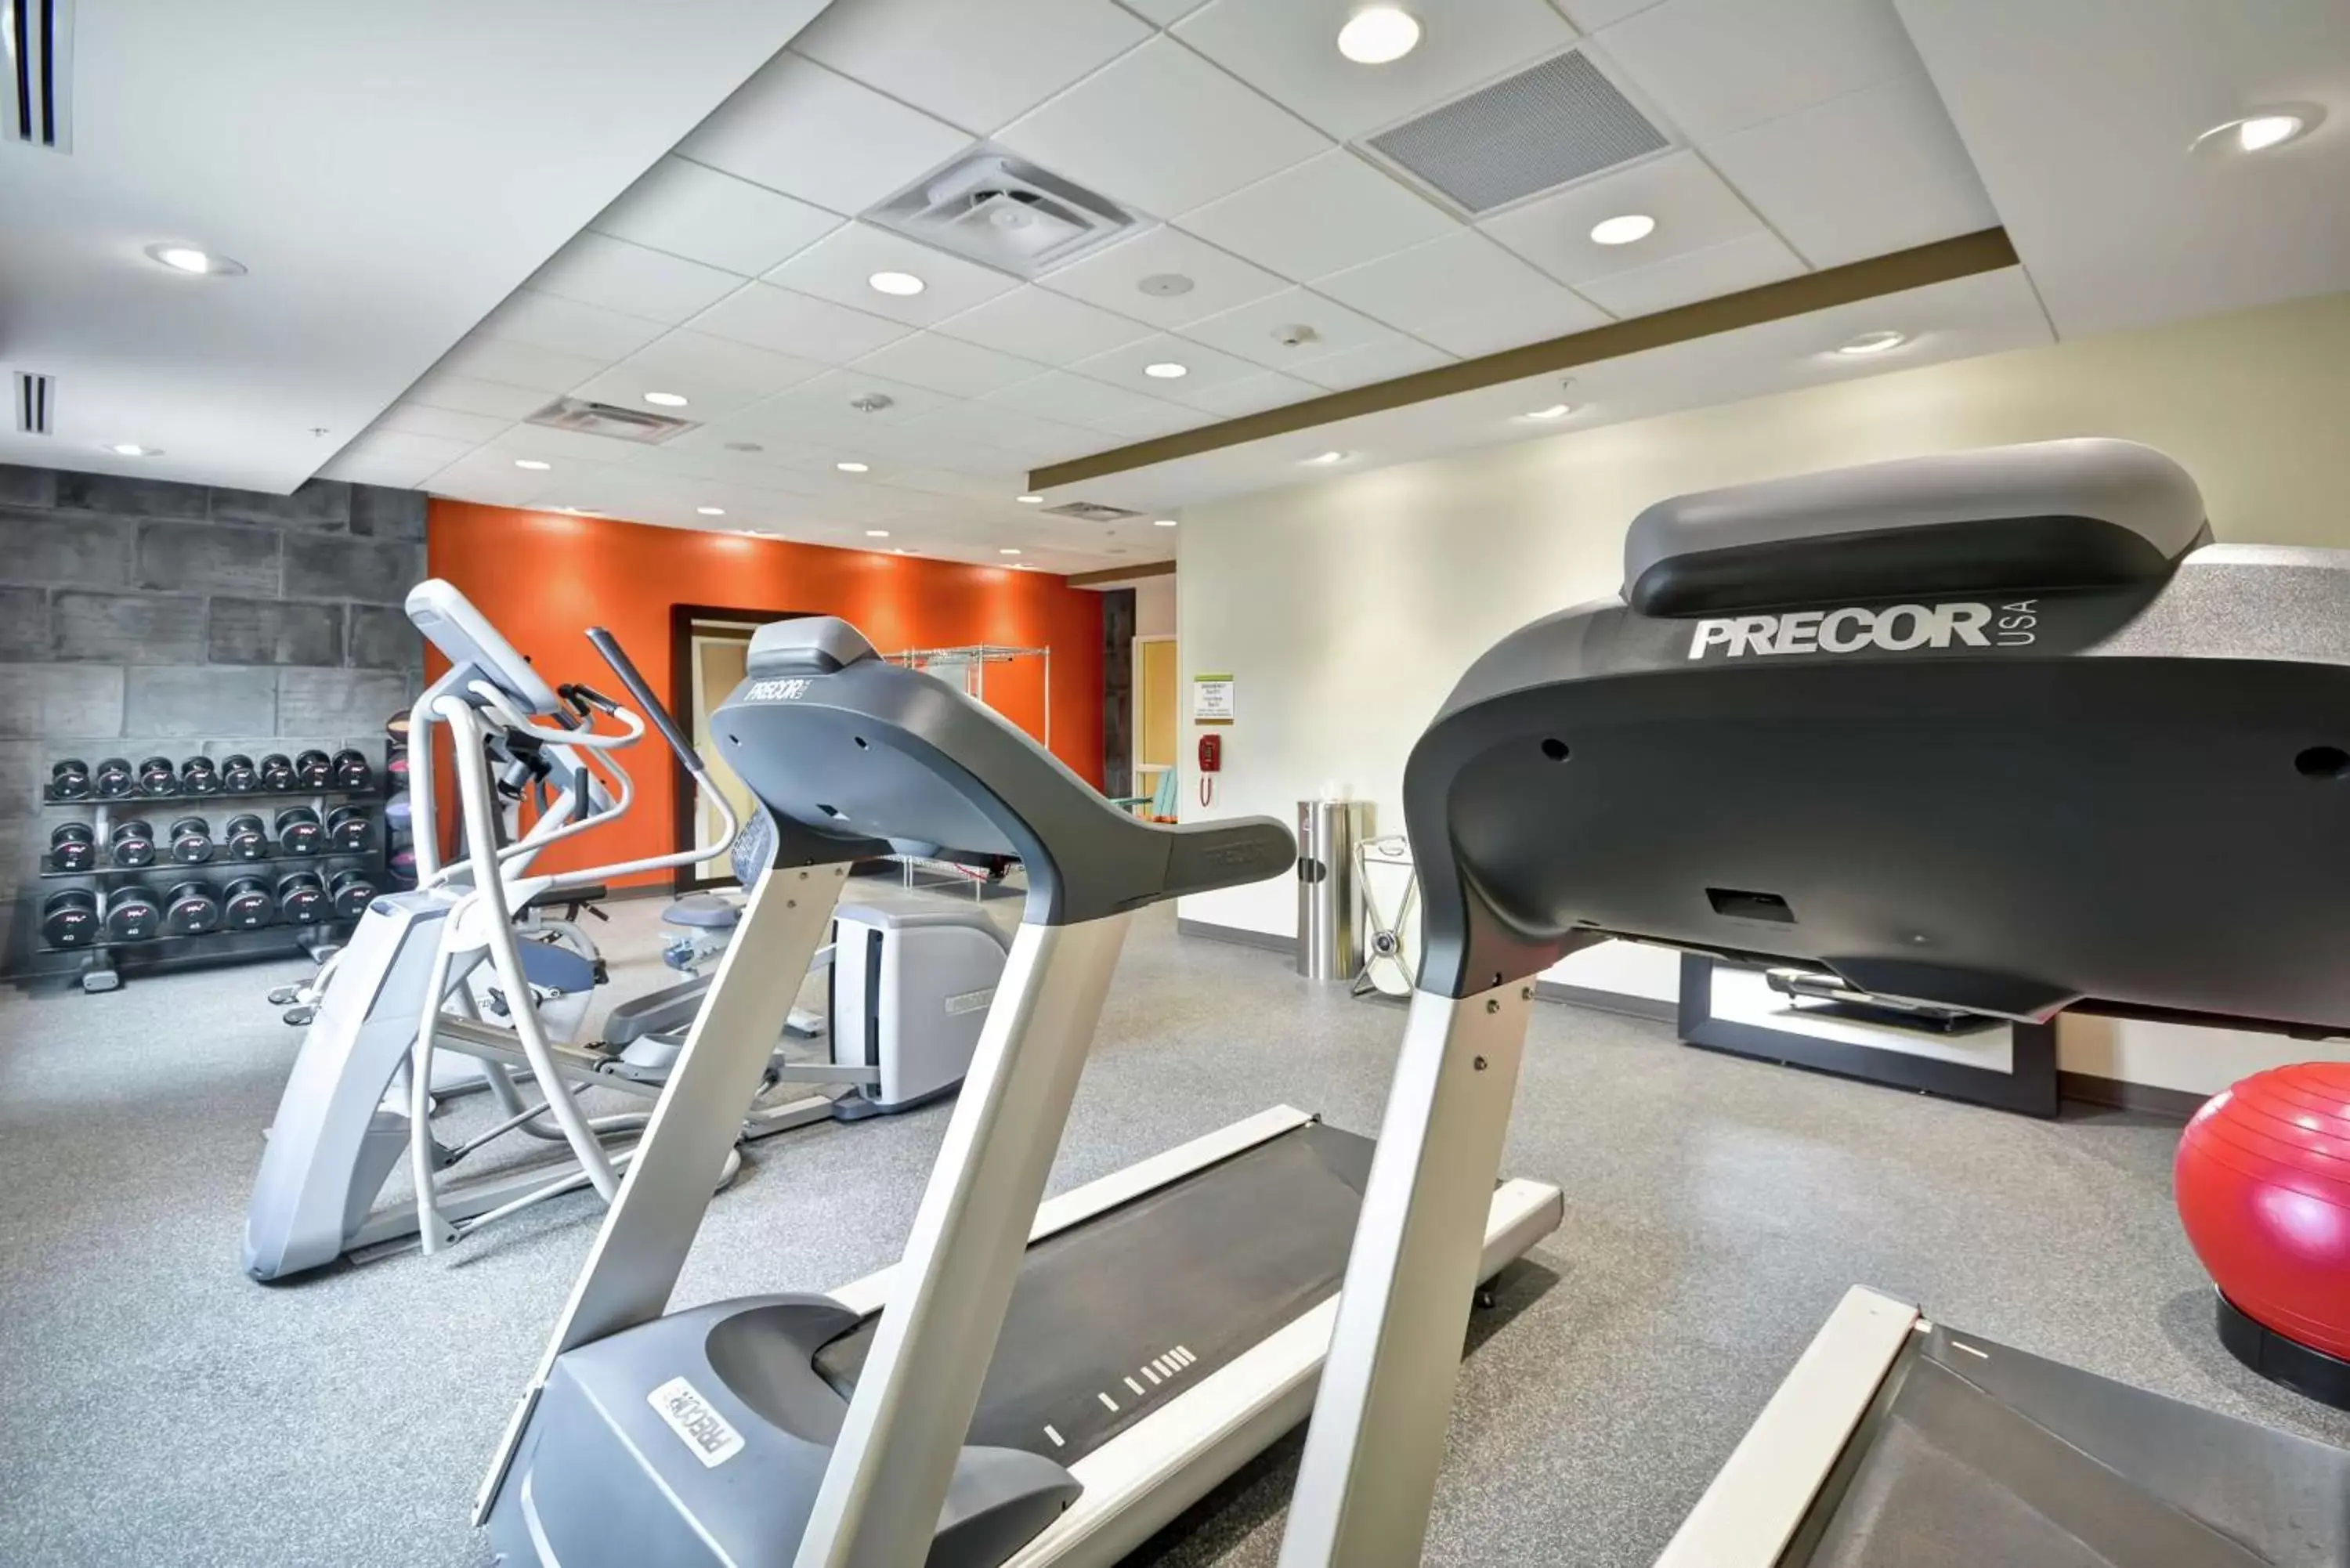 Fitness centre/facilities, Fitness Center/Facilities in Home2 Suites By Hilton Minneapolis-Eden Prairie